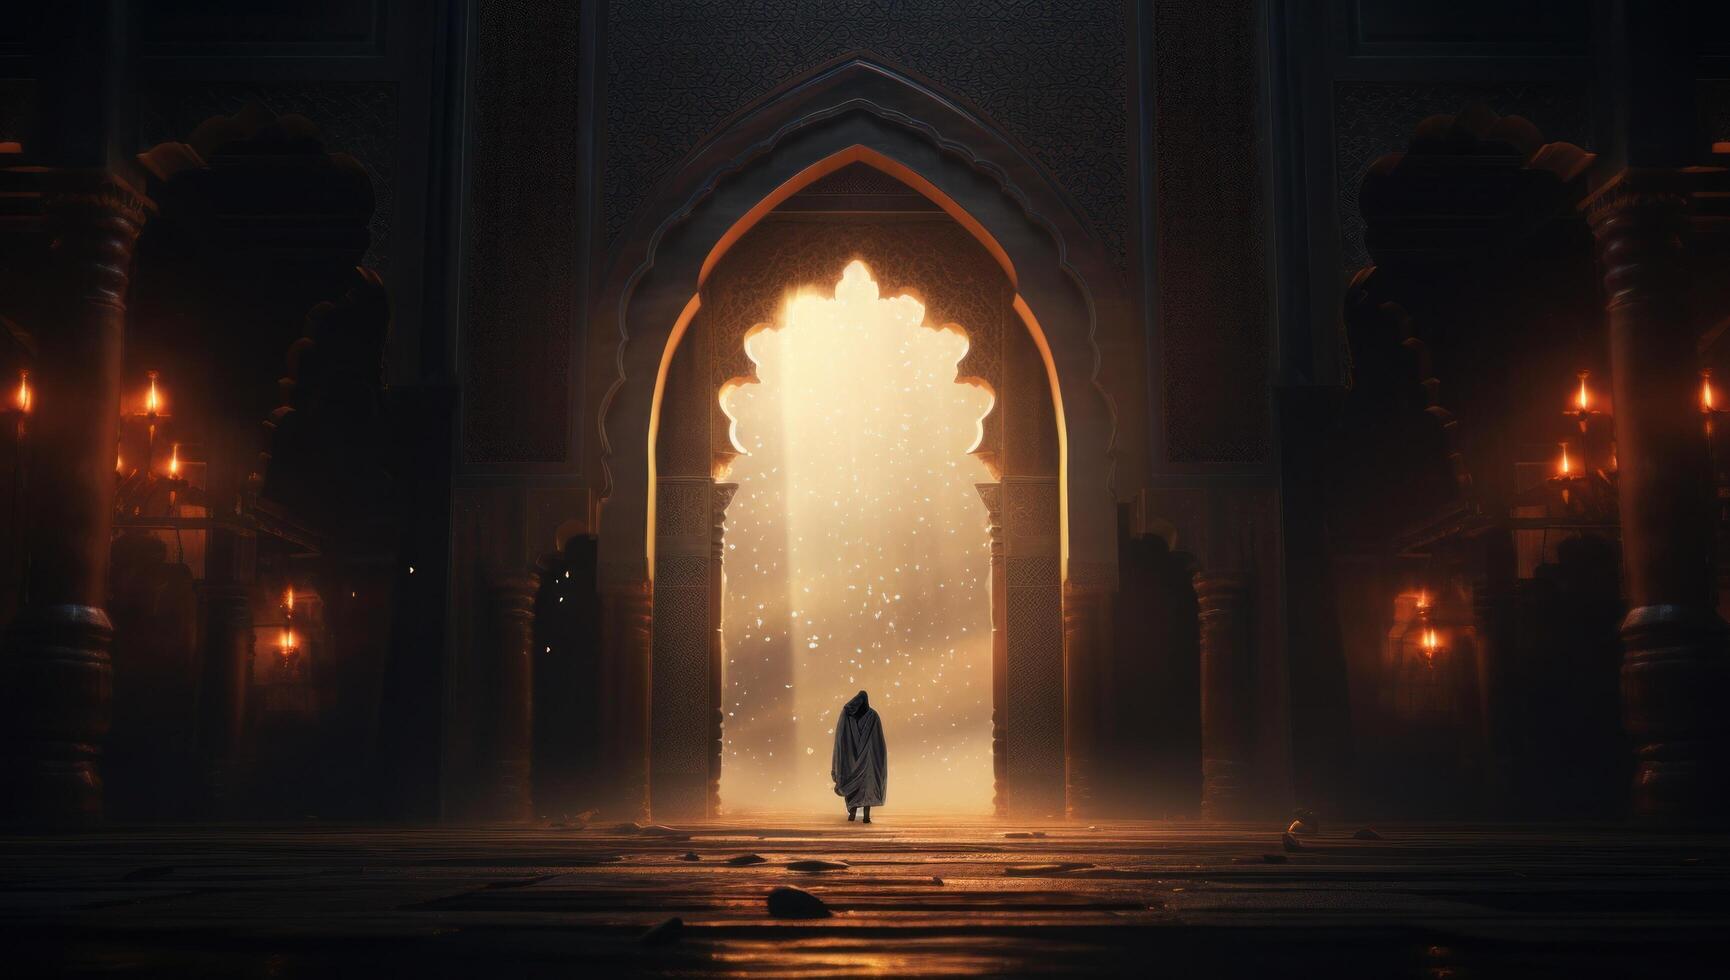 AI generated an image of an arched doorway leading into a mosque photo